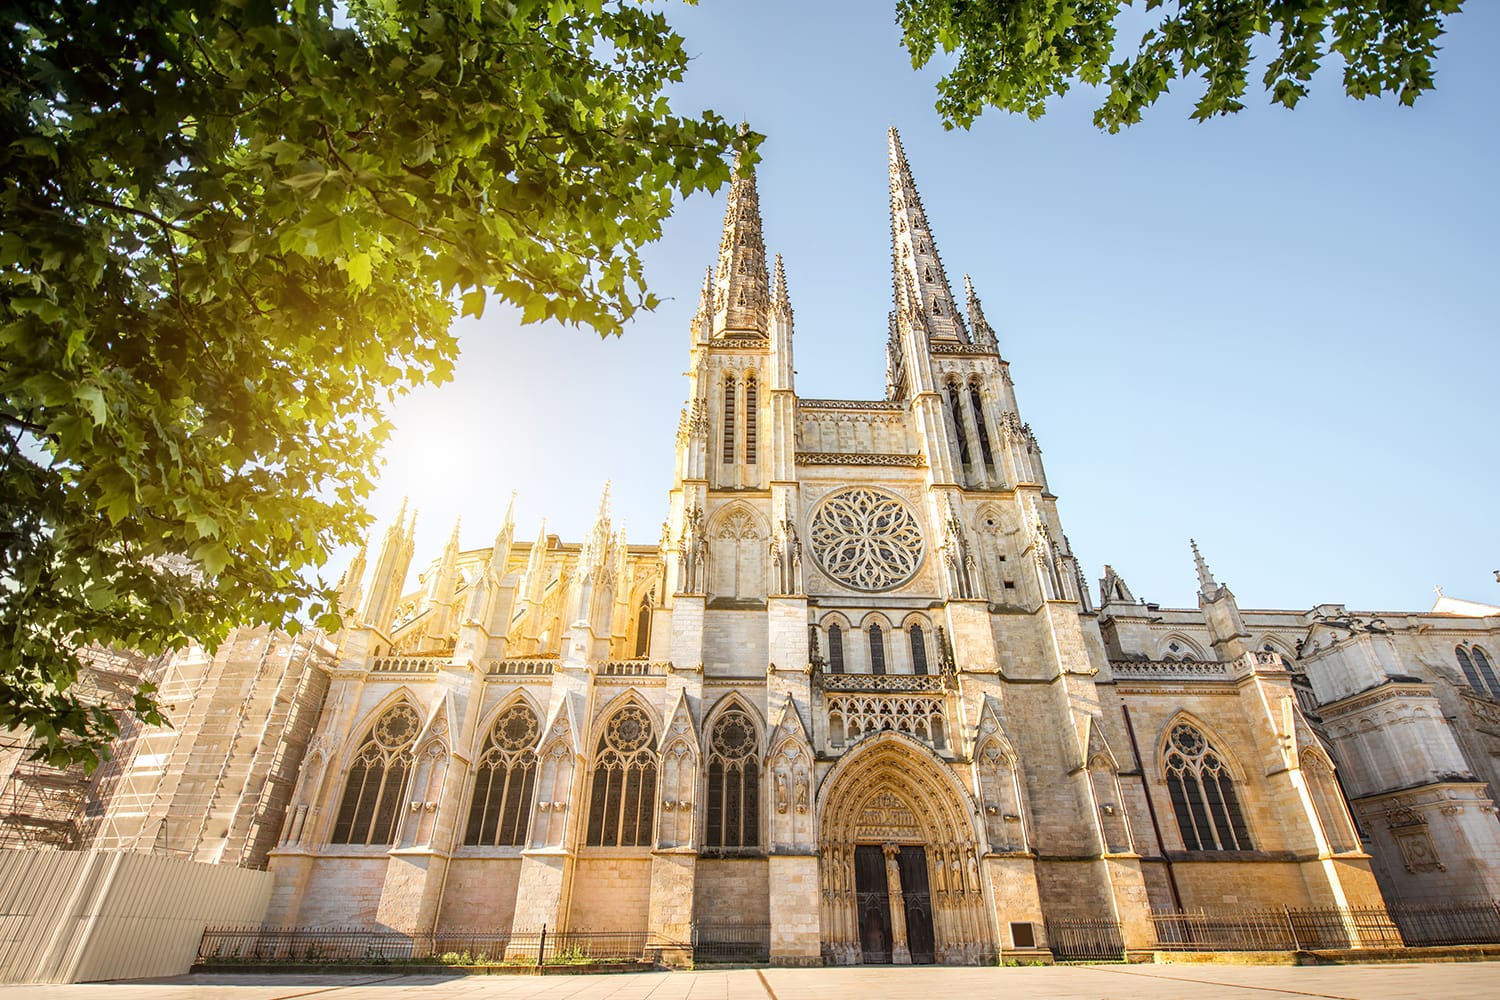 Saint Pierre cathedral in Bordeaux, France